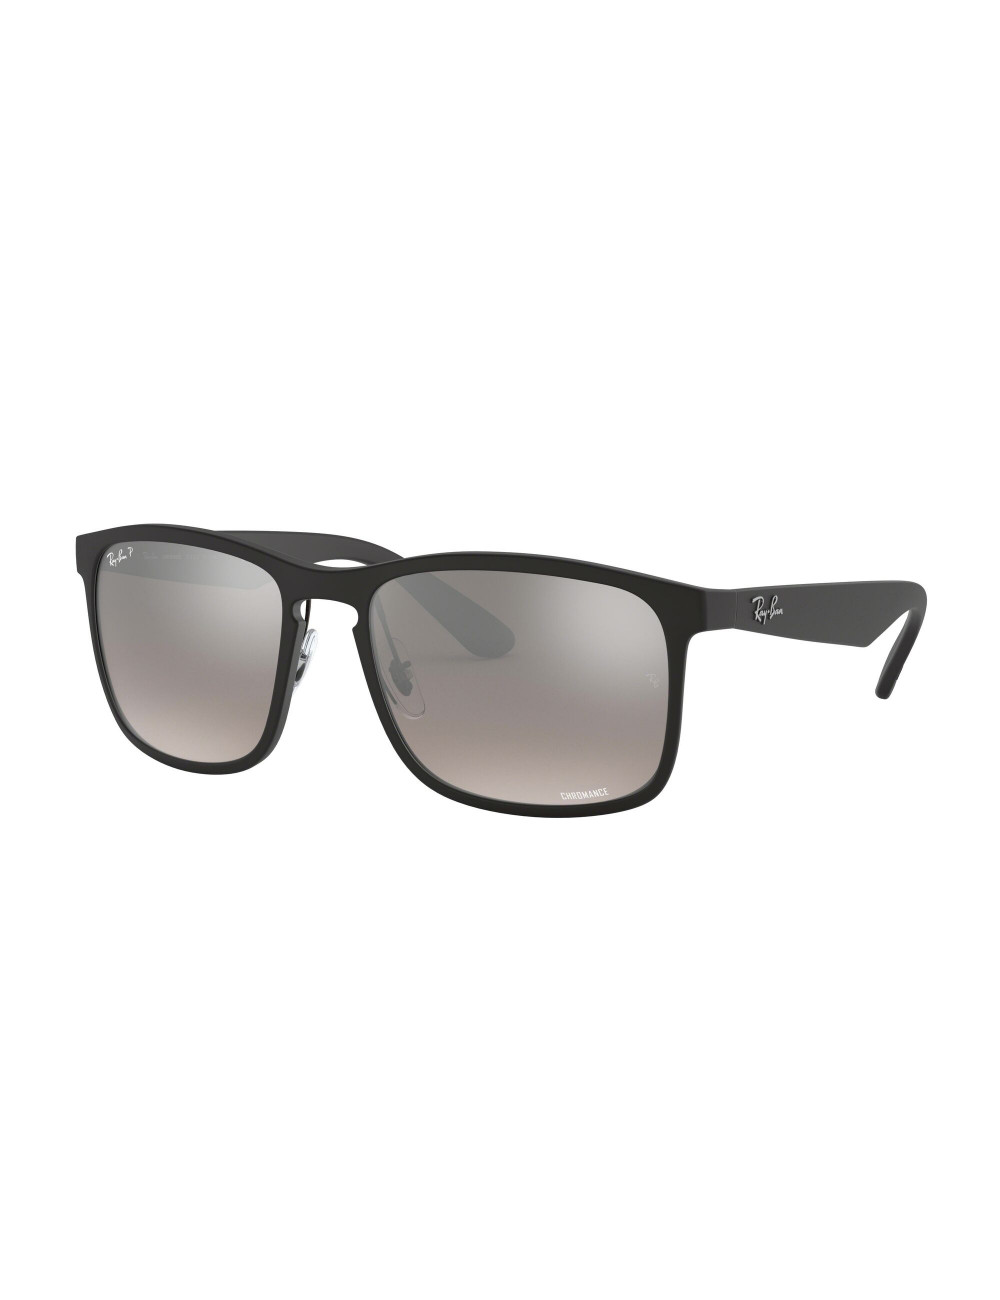 Ray Ban RB4264 601S5J